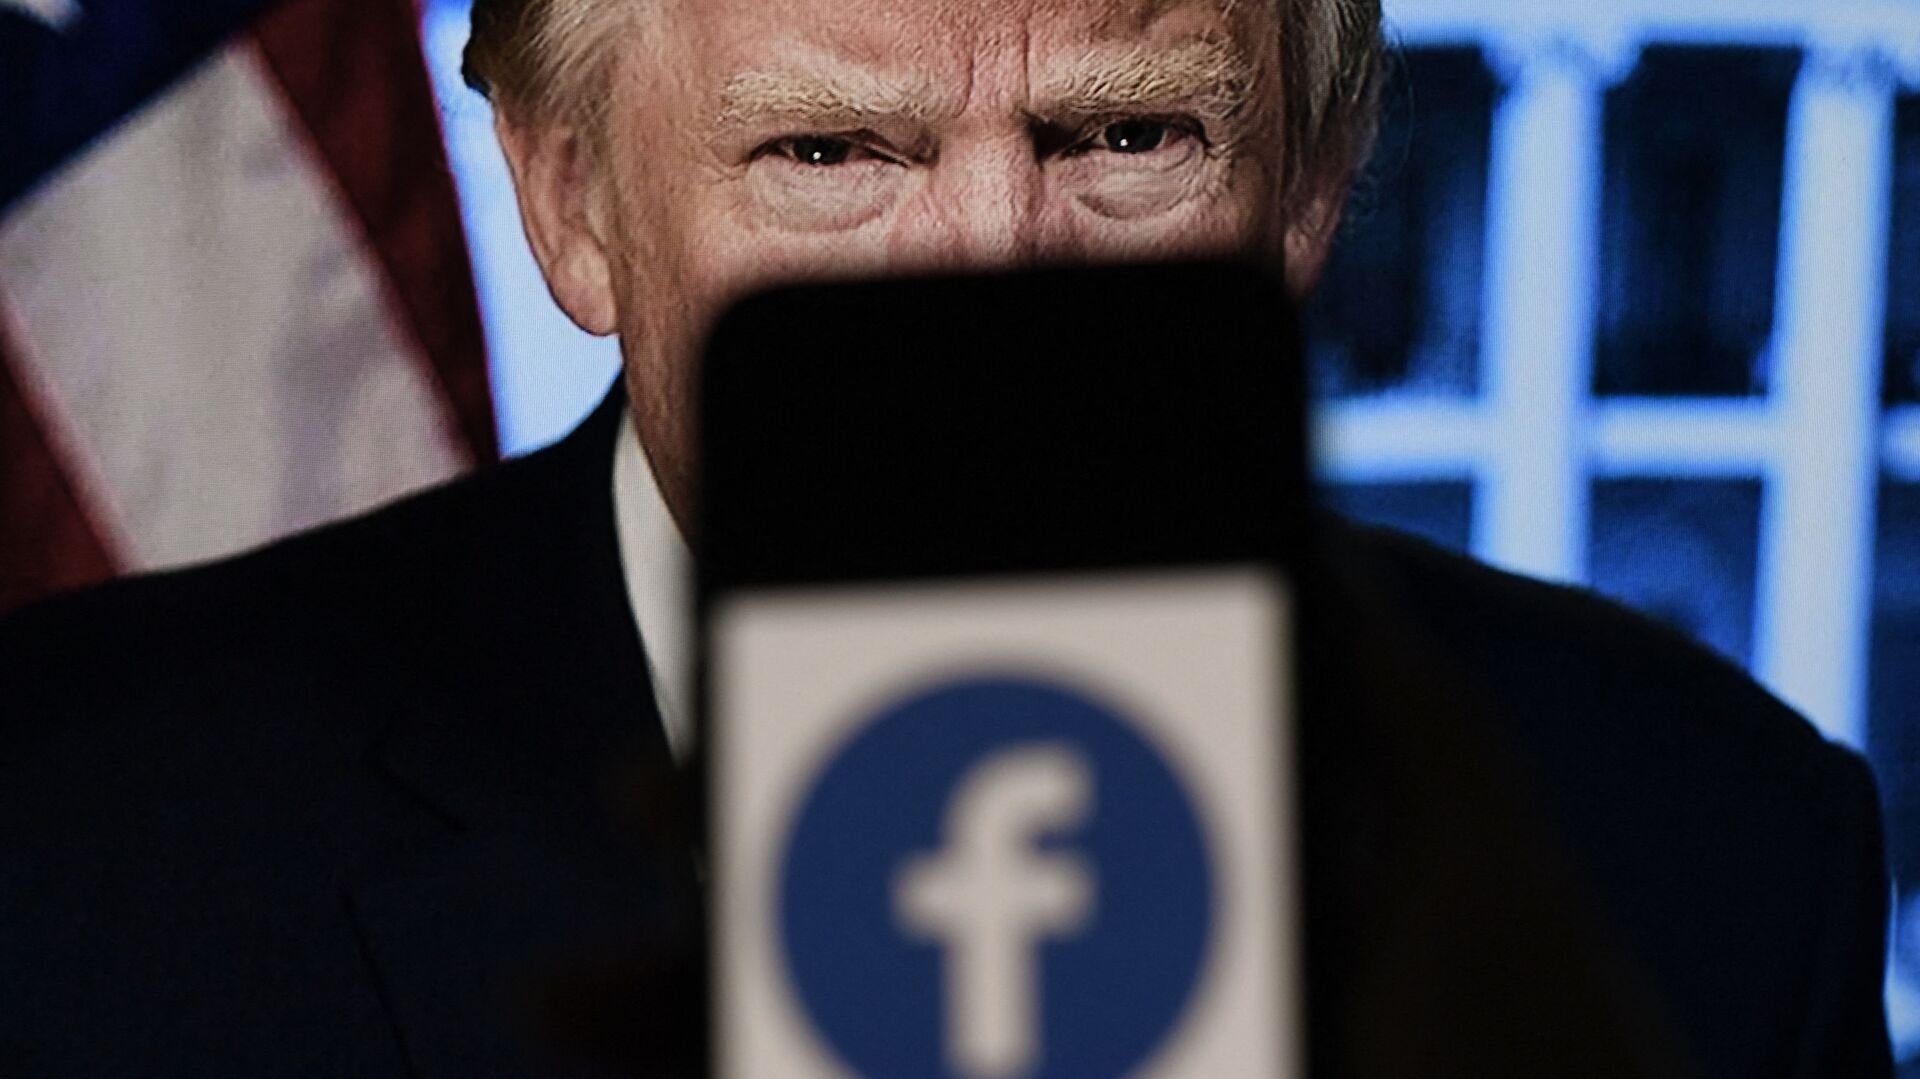 In this photo illustration, a phone screen displays a Facebook logo with the official portrait of former US President Donald Trump on the background, on May 4, 2021, in Arlington, Virginia. - Facebook's independent oversight board was set for a momentous decision on the platform's ban of former US president Donald Trump, as debate swirls on the role of social media in curbing hateful and abusive speech while controlling political discourse. - Sputnik International, 1920, 04.06.2021